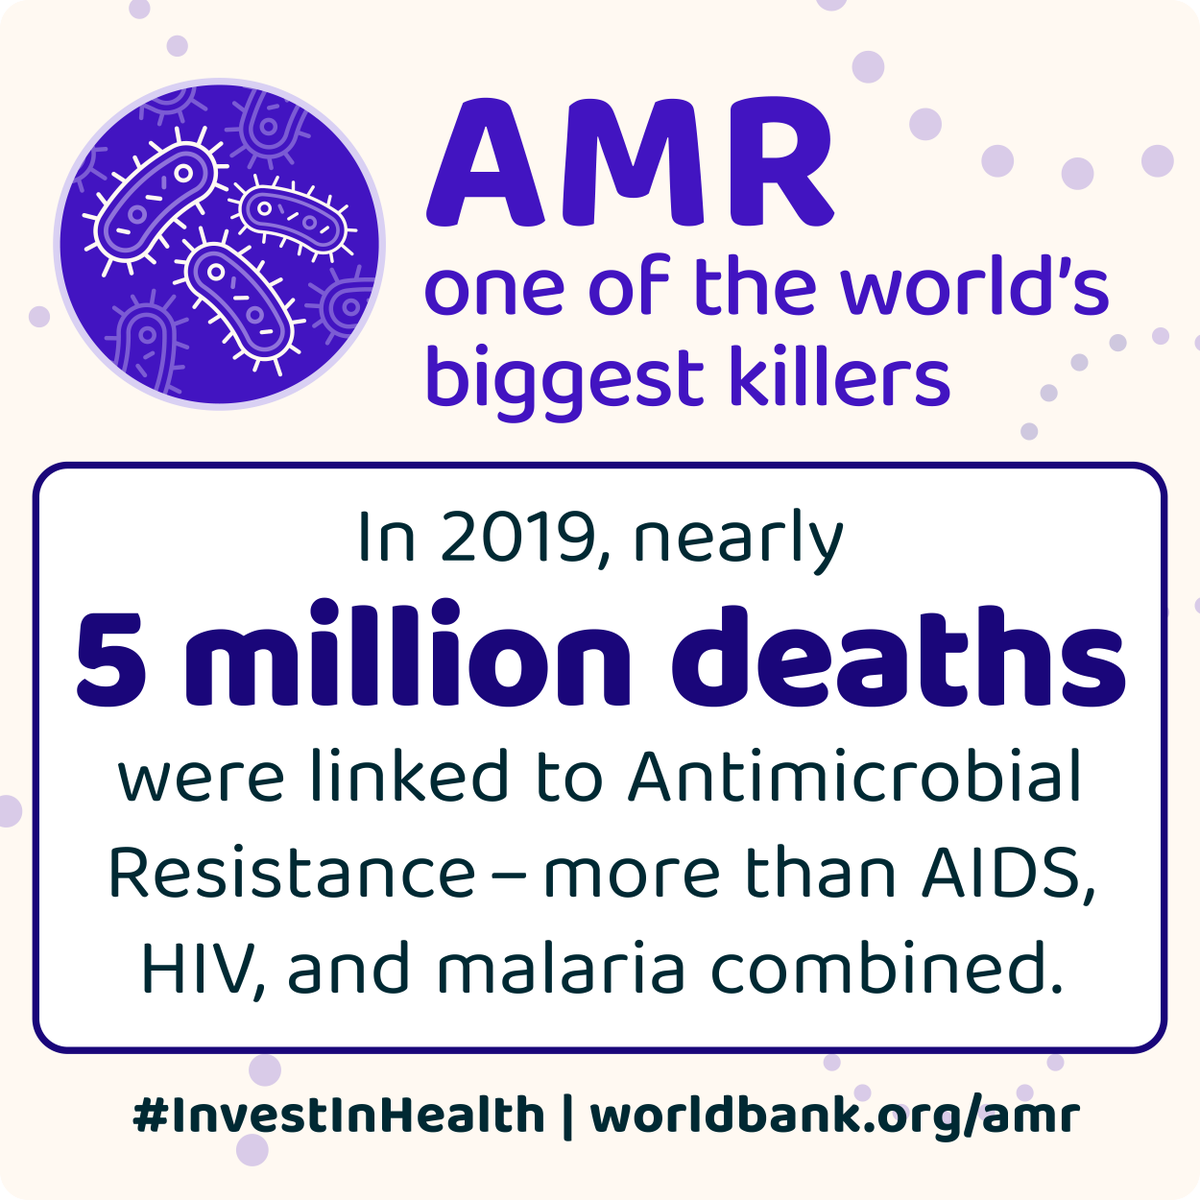 Nearly 5 million deaths were linked to Antimicrobial Resistance (AMR) in 2019—more than AIDS, HIV, and malaria combined. Let's act now to reduce infections and strengthen monitoring. #InvestInHealth #AMRaction Read more at wrld.bg/NoS650REPMN